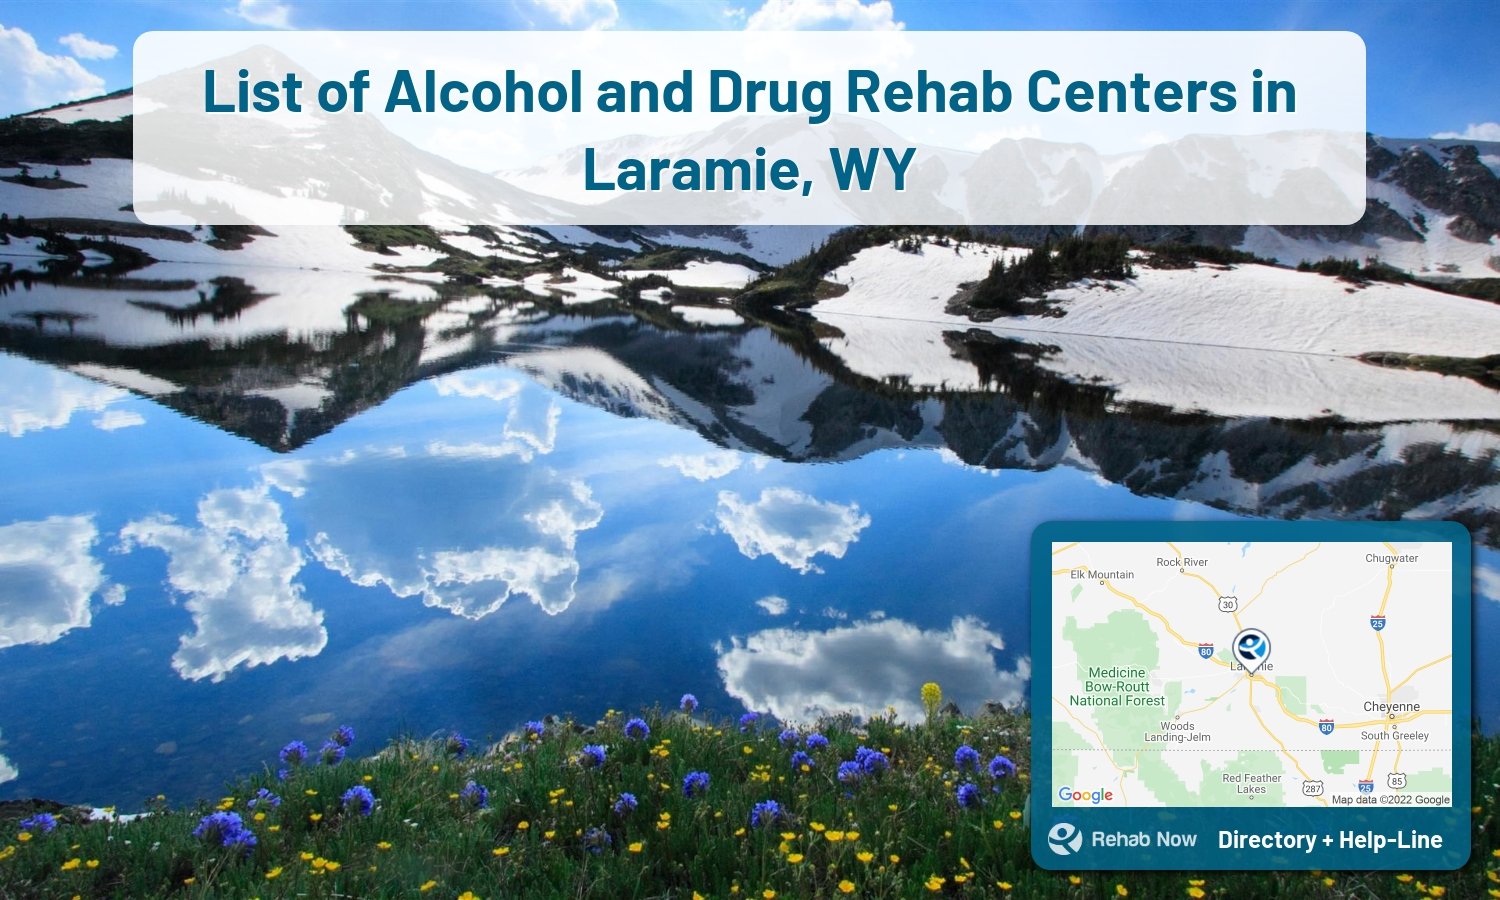 Easily find the top Rehab Centers in Laramie, WY. We researched hard to pick the best alcohol and drug rehab centers in Wyoming.